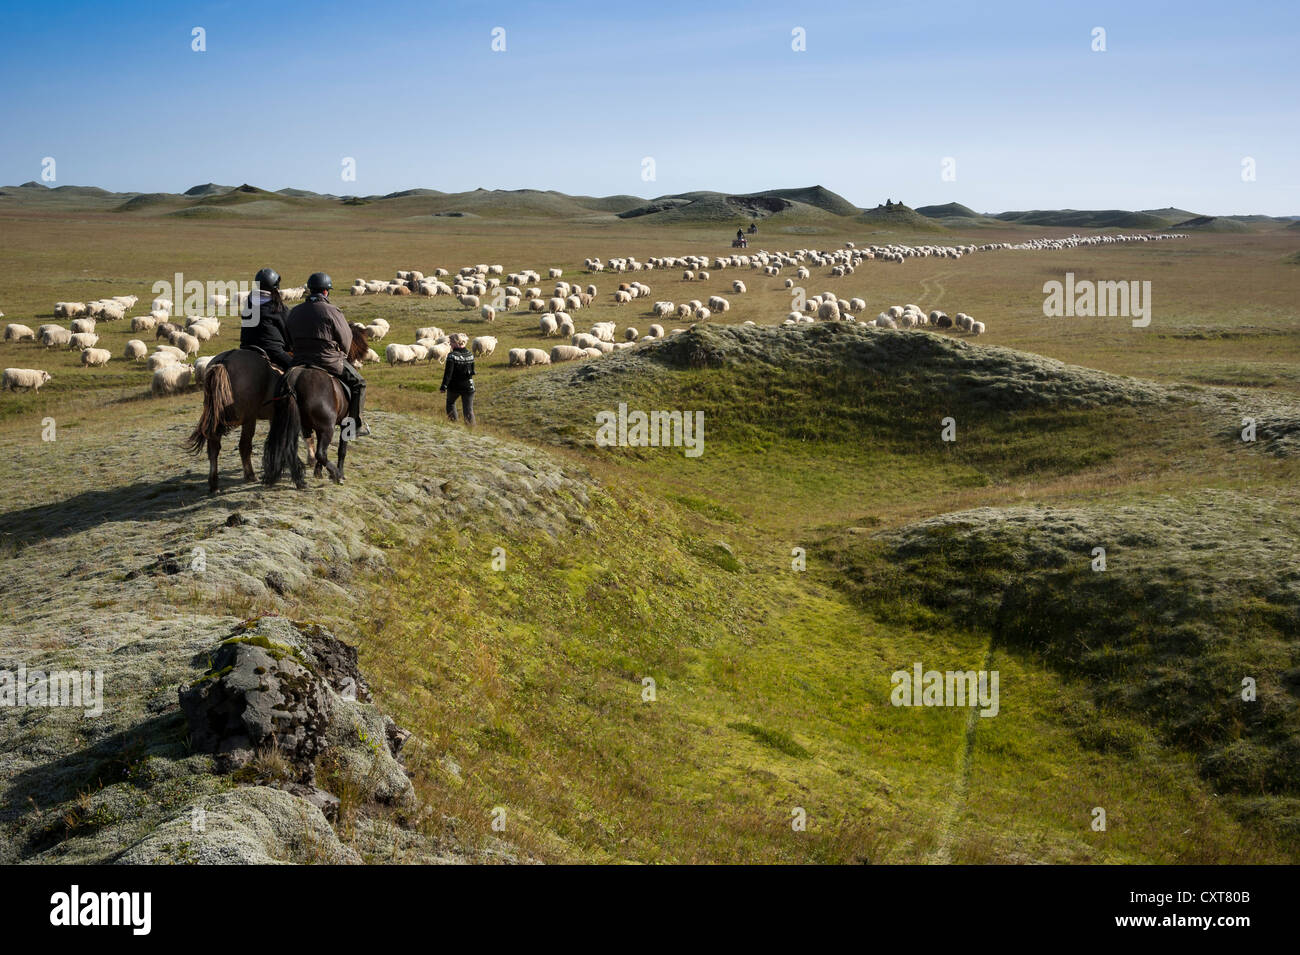 Flock of sheep on a green meadow or pasture, riders on horses, bringing down sheep in Kirkjubæjarklaustur, South Iceland Stock Photo